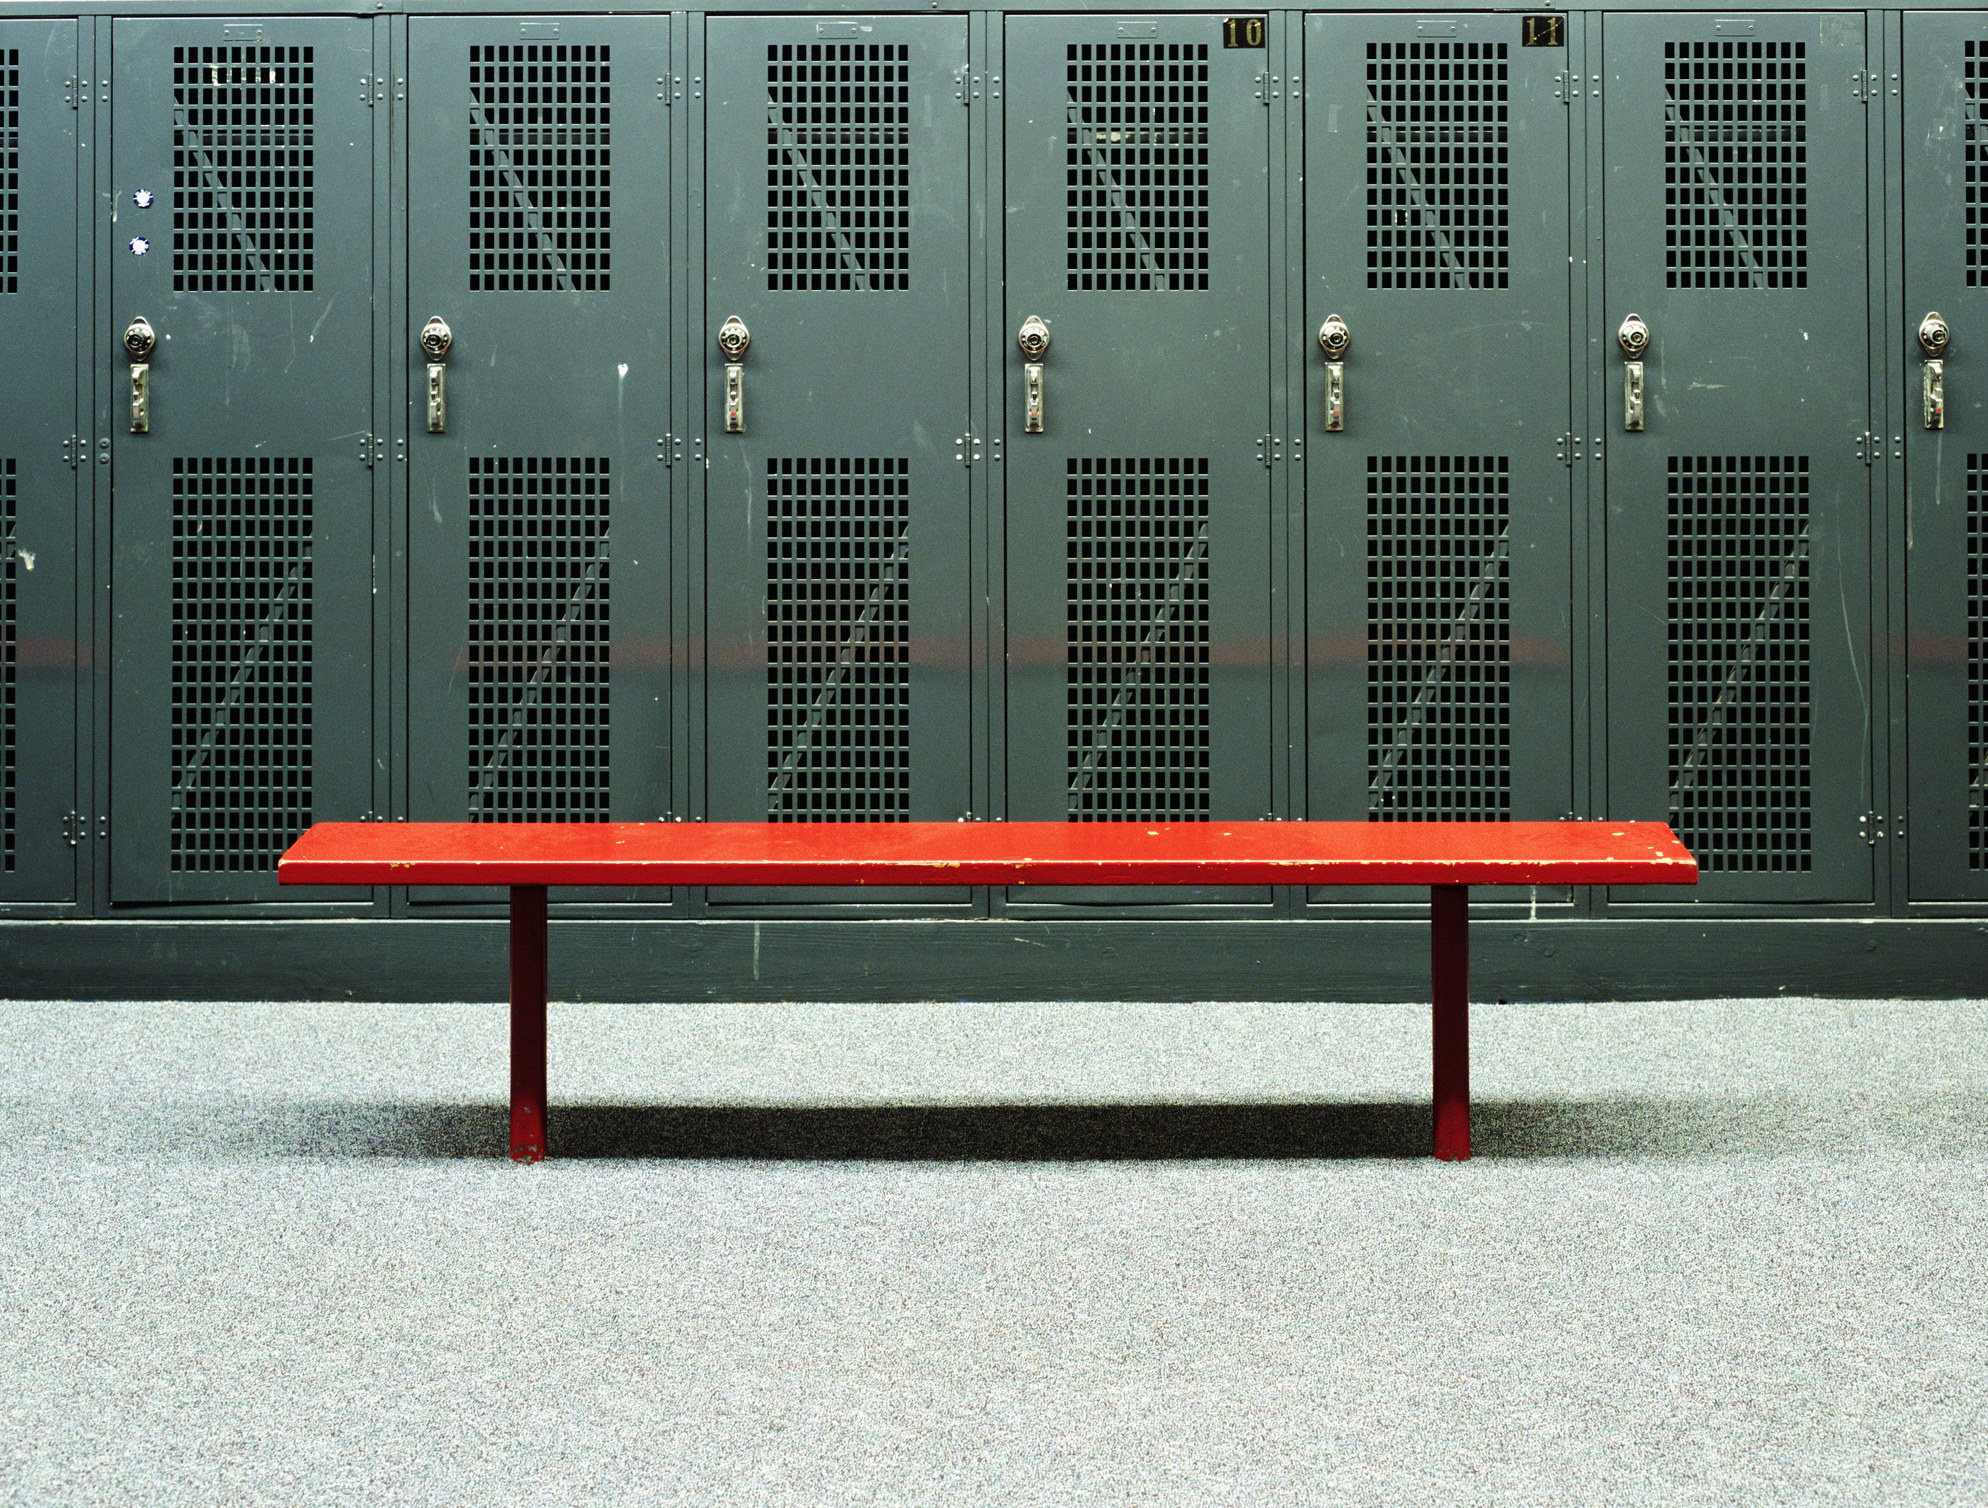 An empty bench in front of lockers